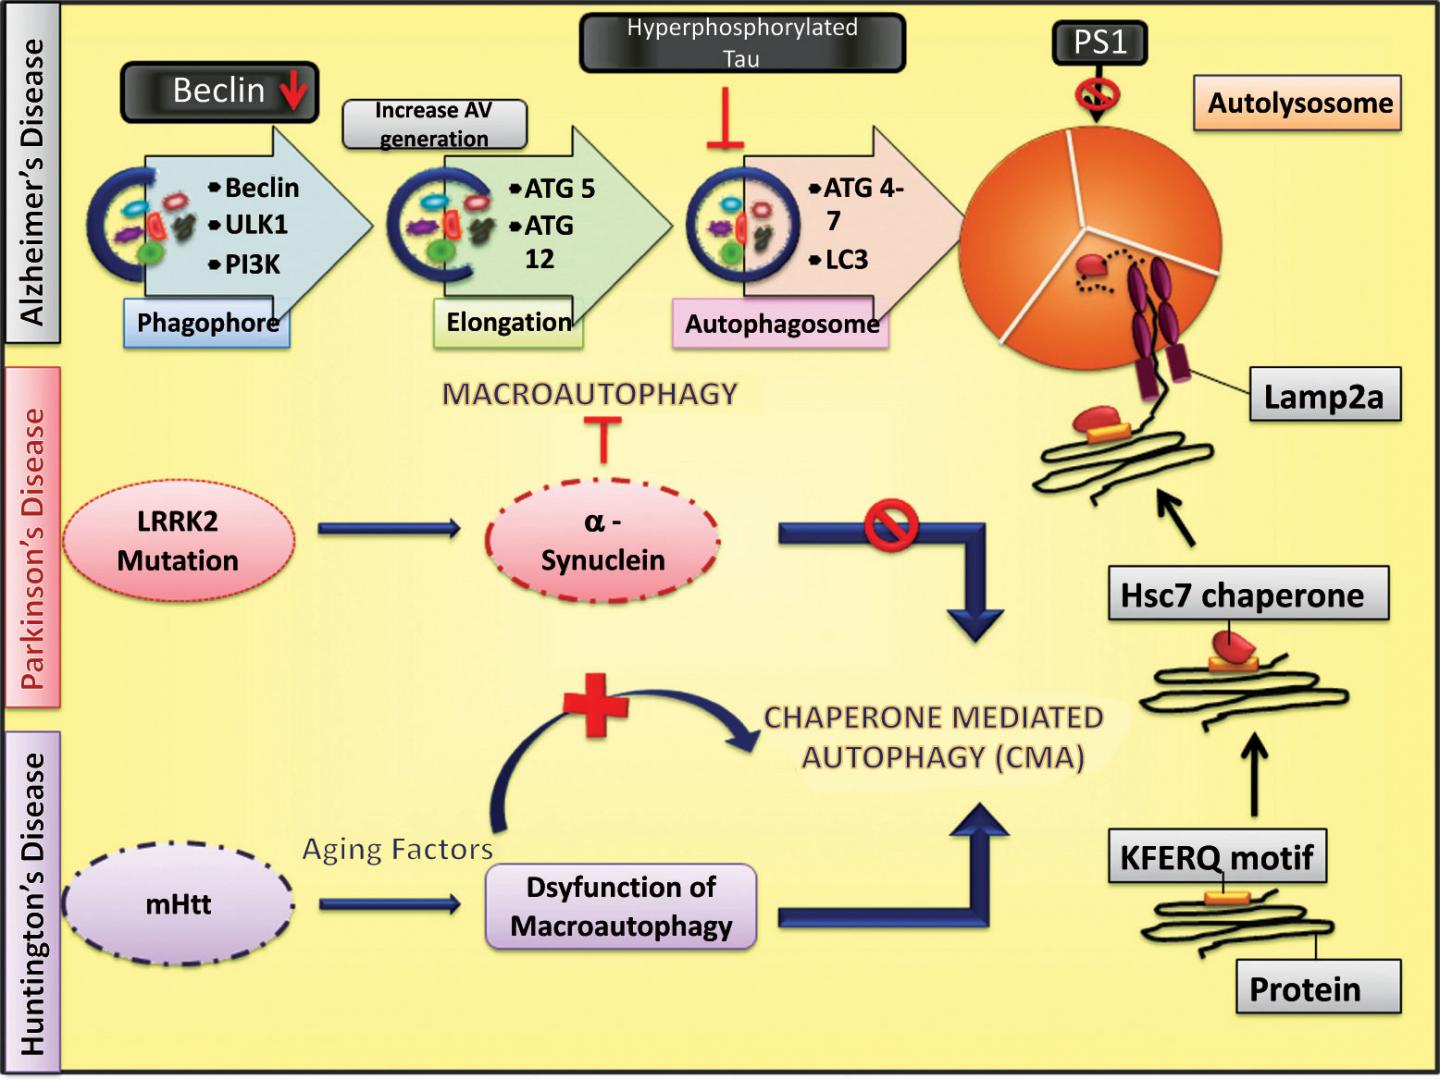 Autophagy and Mitochondria: Targets in Neurodegenerative Disorders